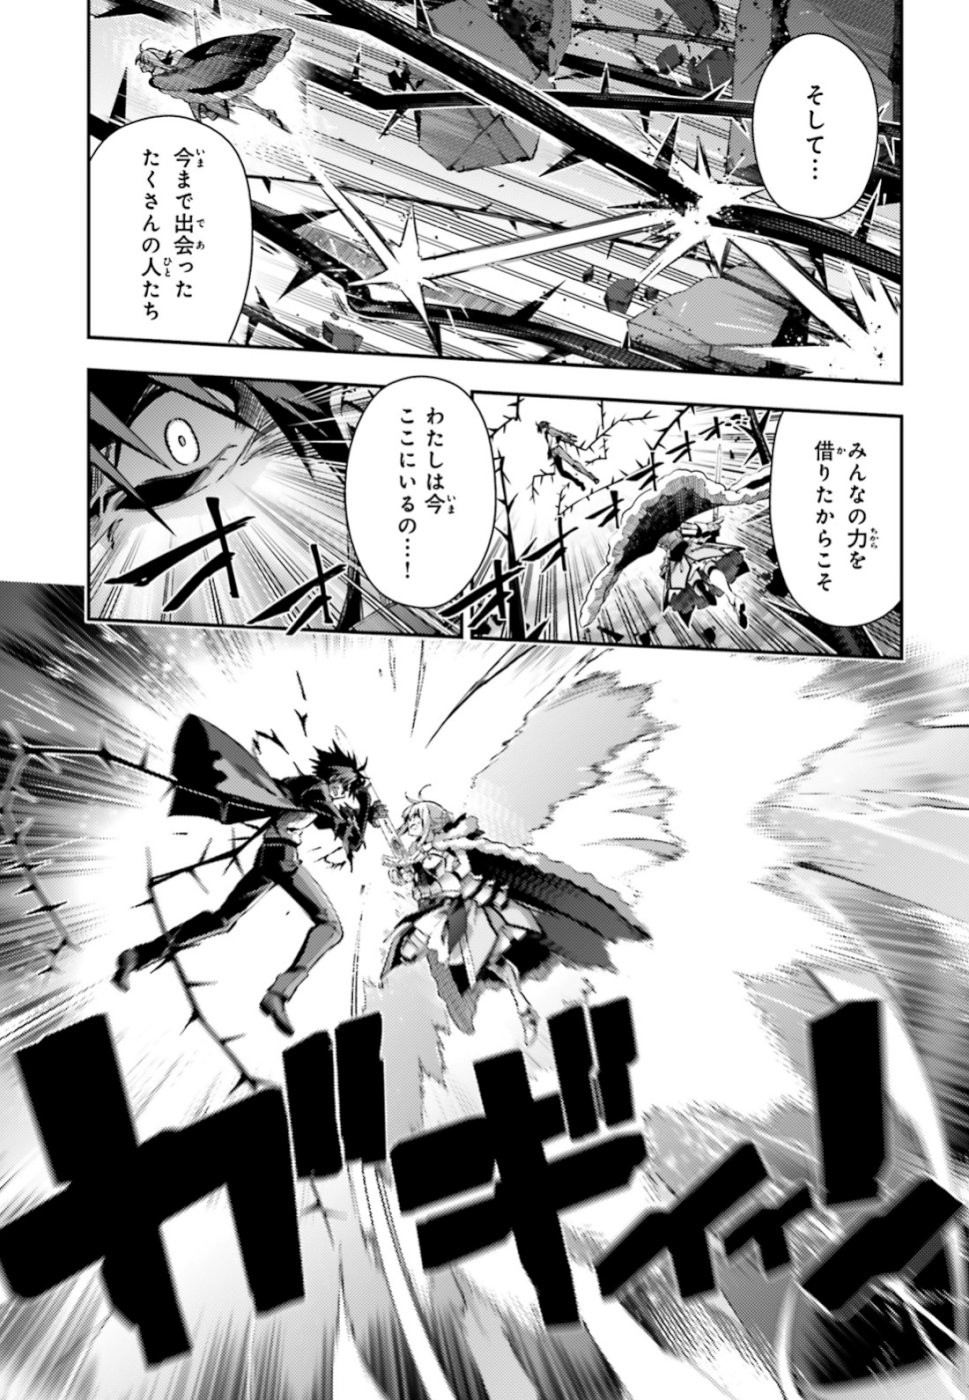 Fate/Kaleid Liner Prisma Illya Drei! - Chapter 55-2 - Page 3